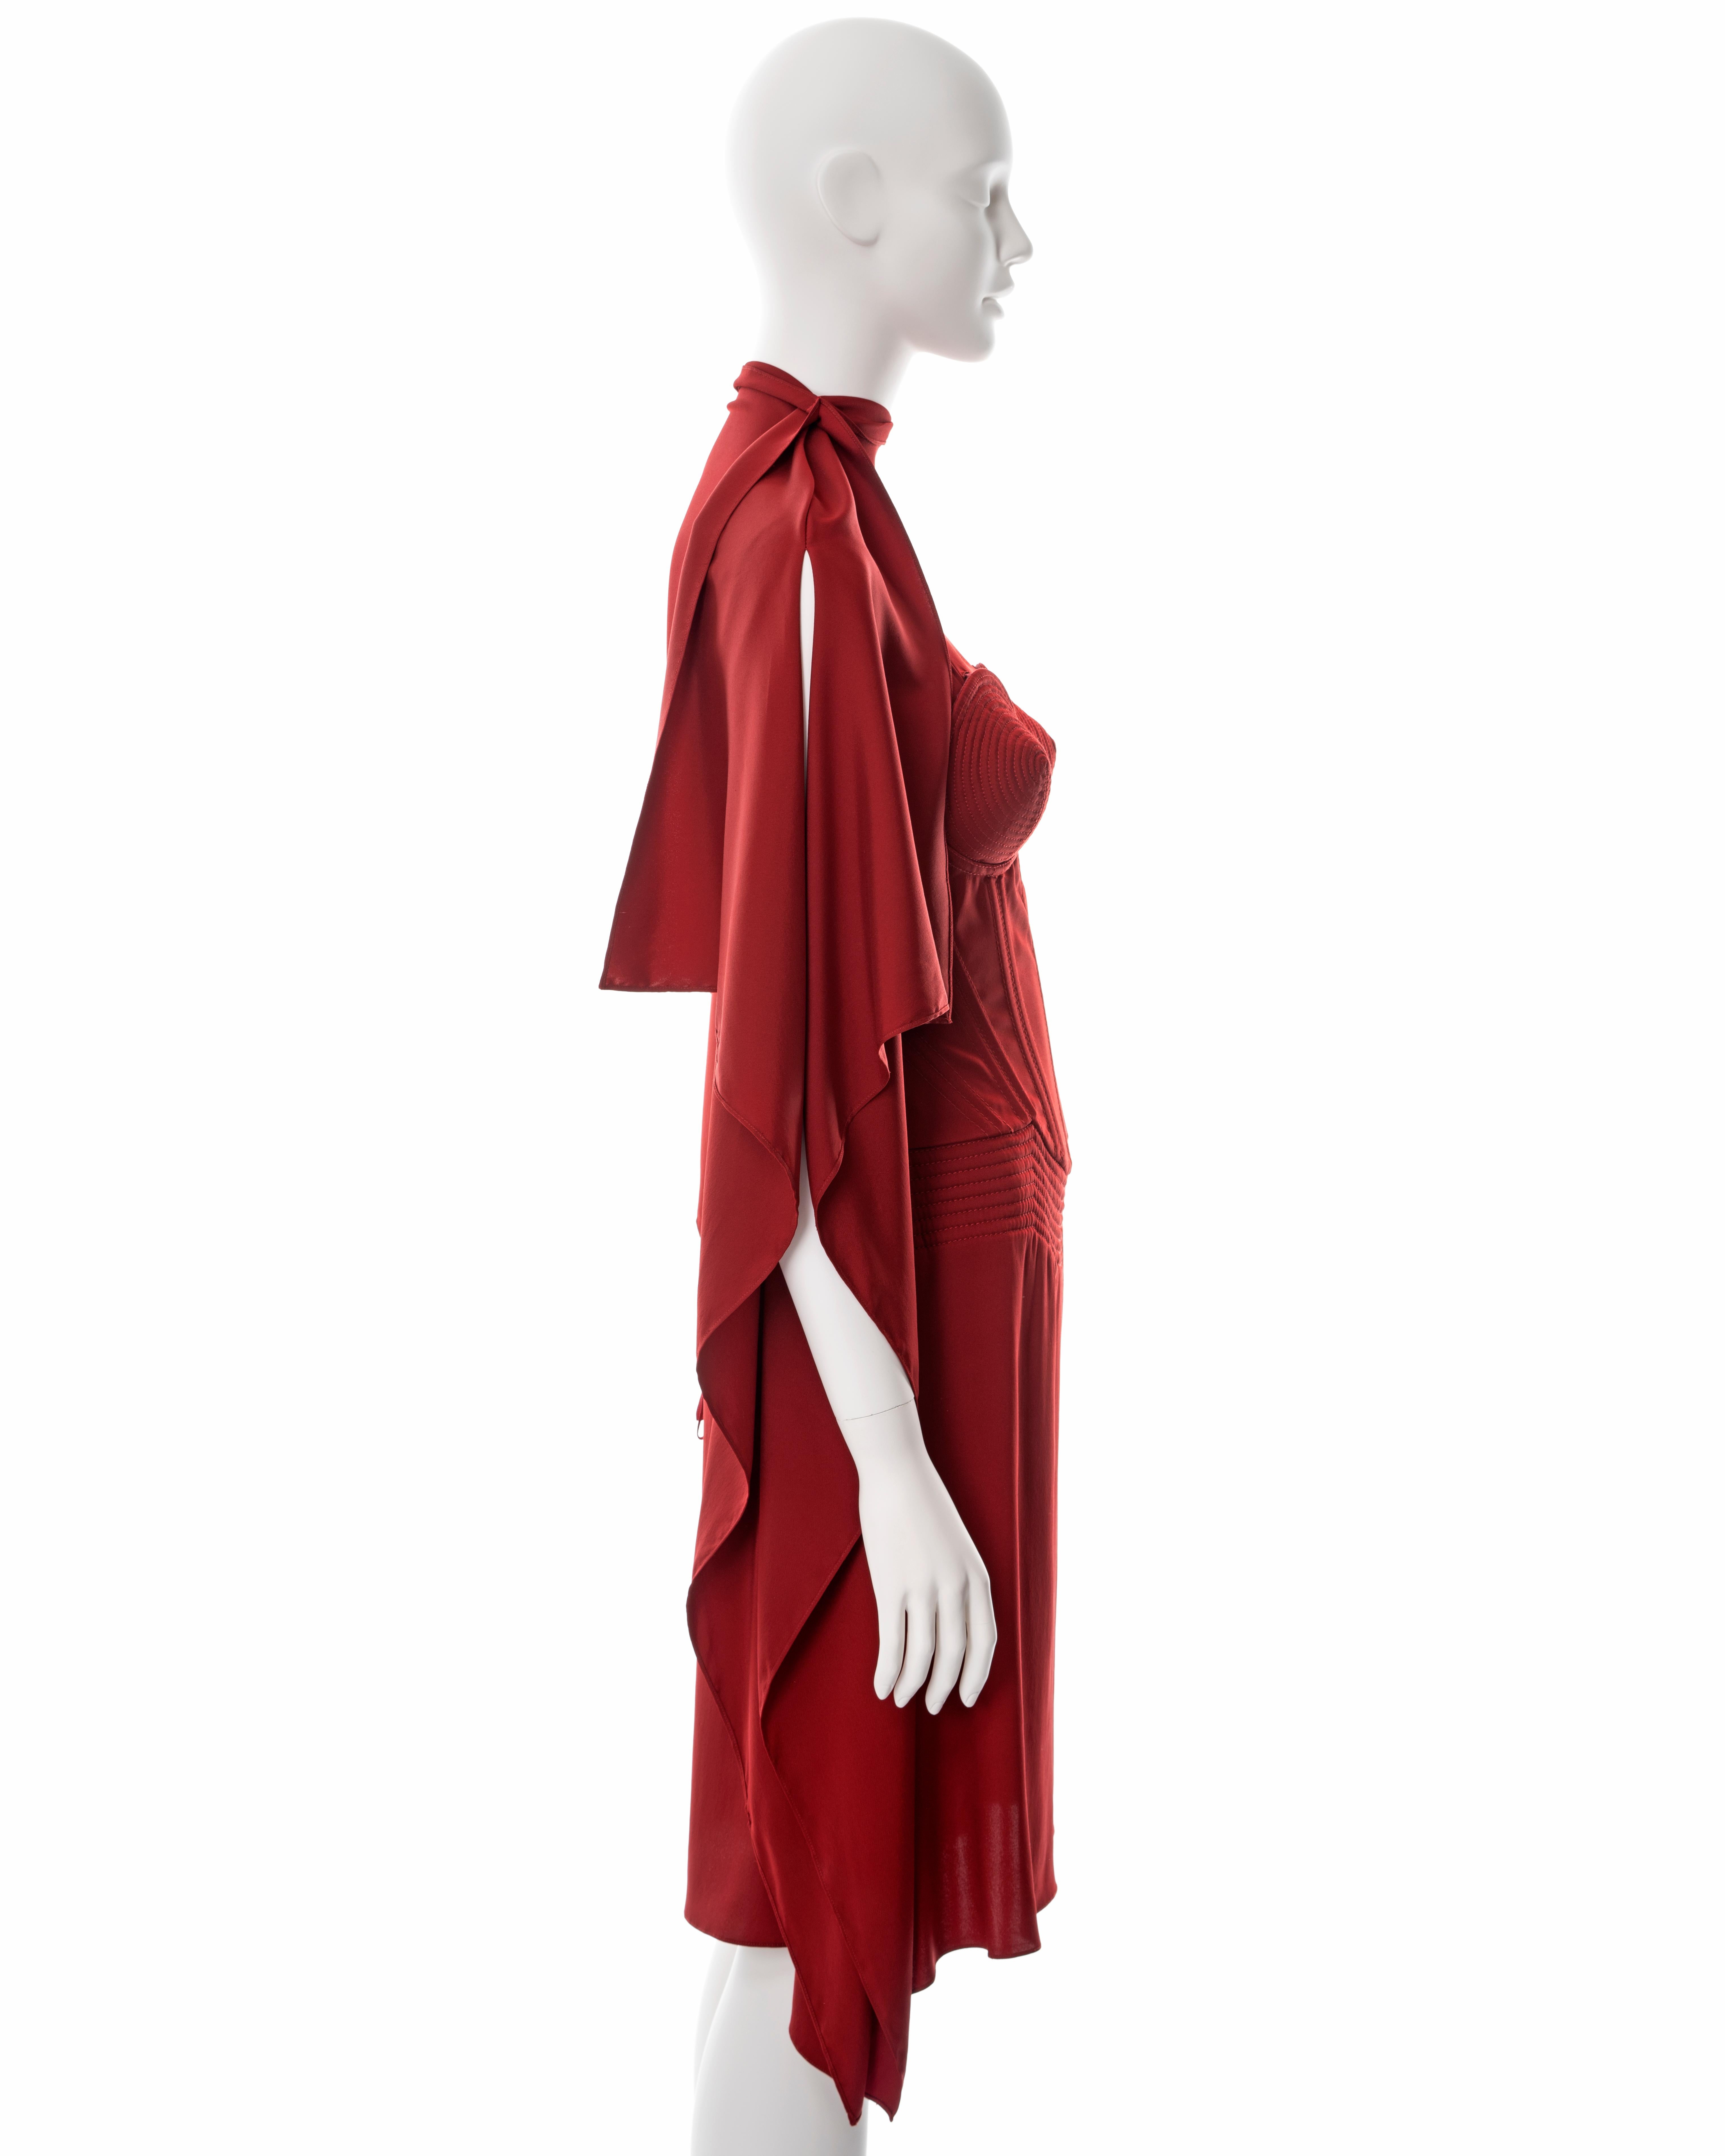 Jean Paul Gaultier red silk dress with built-in cone bra and corset, fw 2010 3